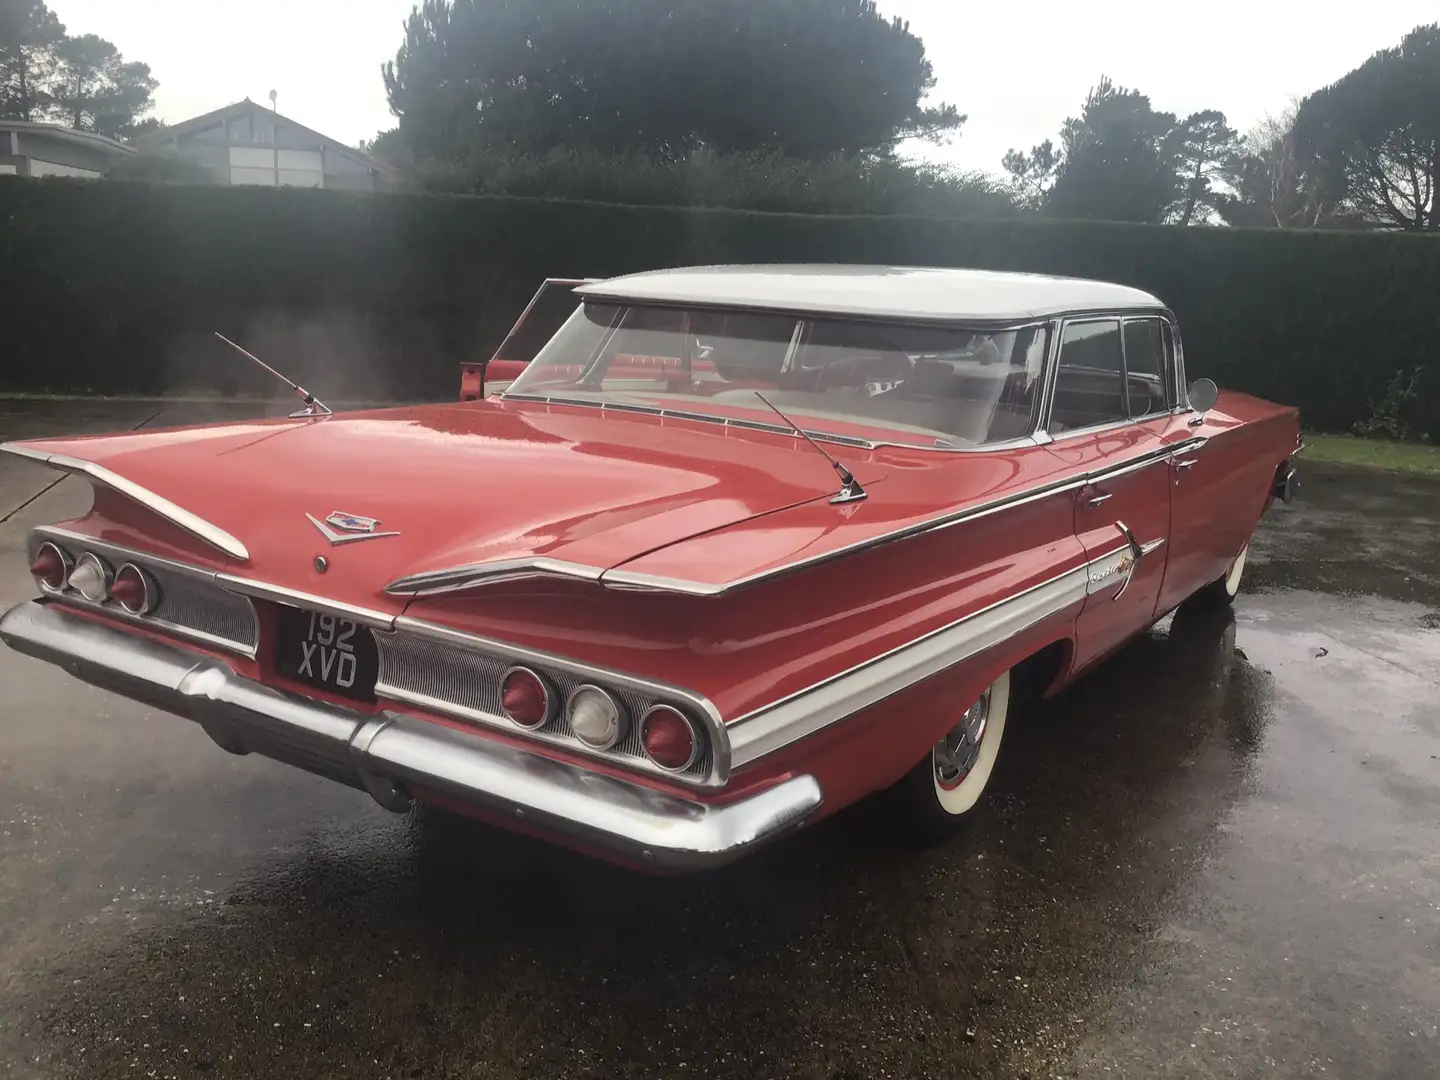 Chevrolet Impala automatic, power steering, working aircon, superb crvena - 1